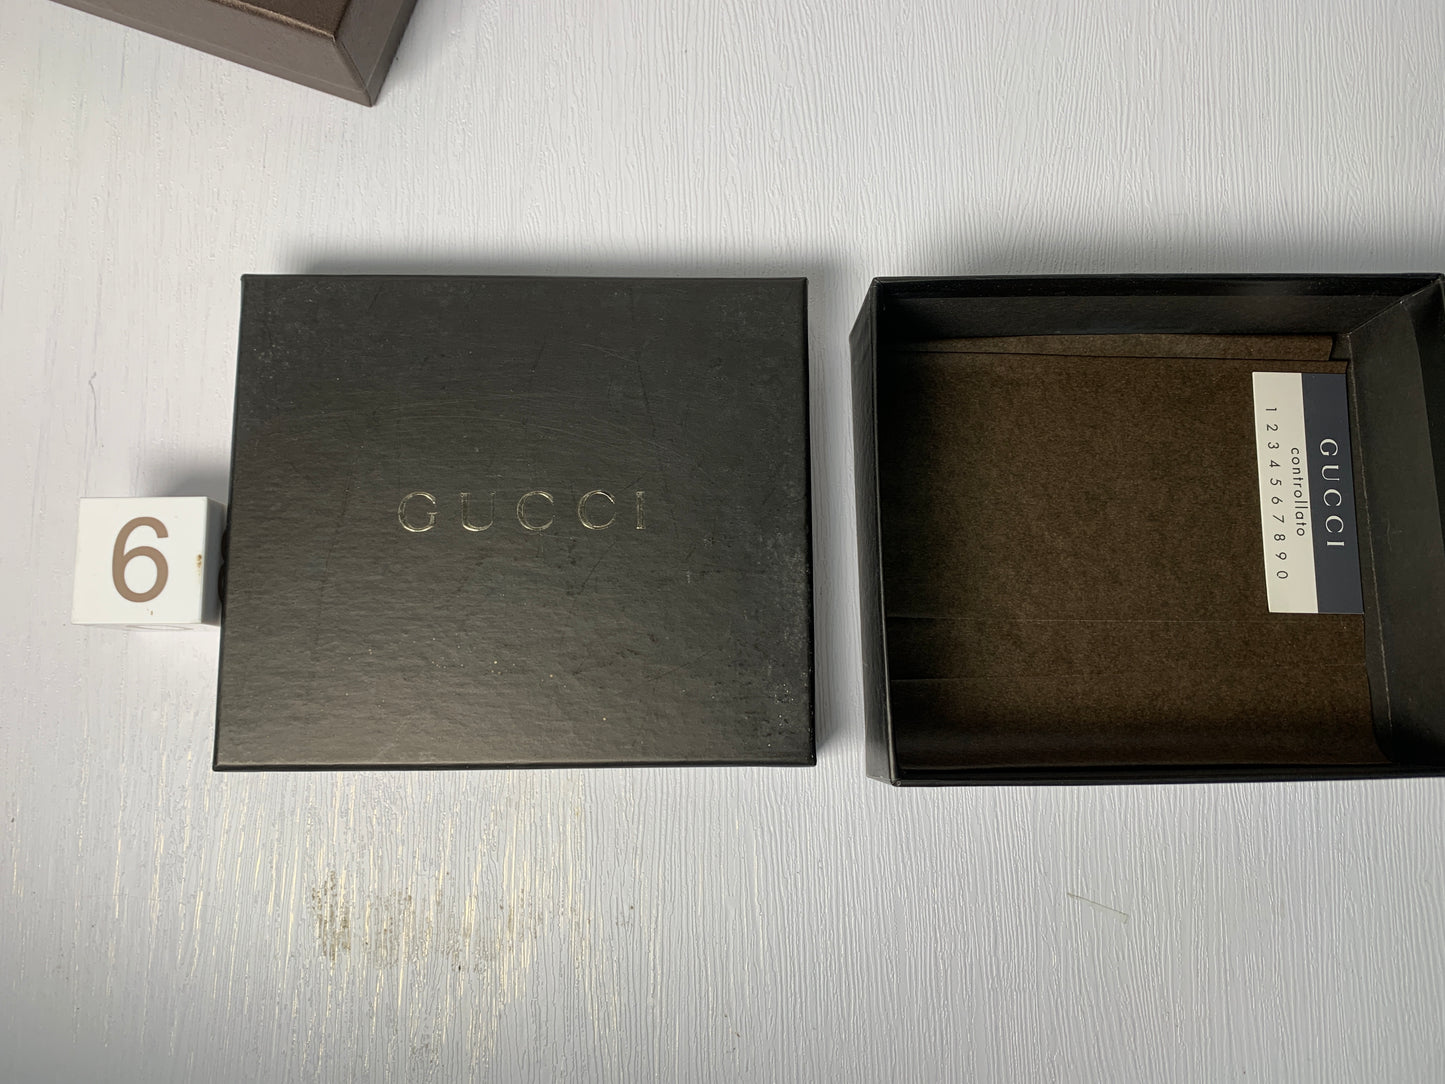 Auth Gucci Box gift for watch wallet jewllery necklace bracelet  - 28JAN1